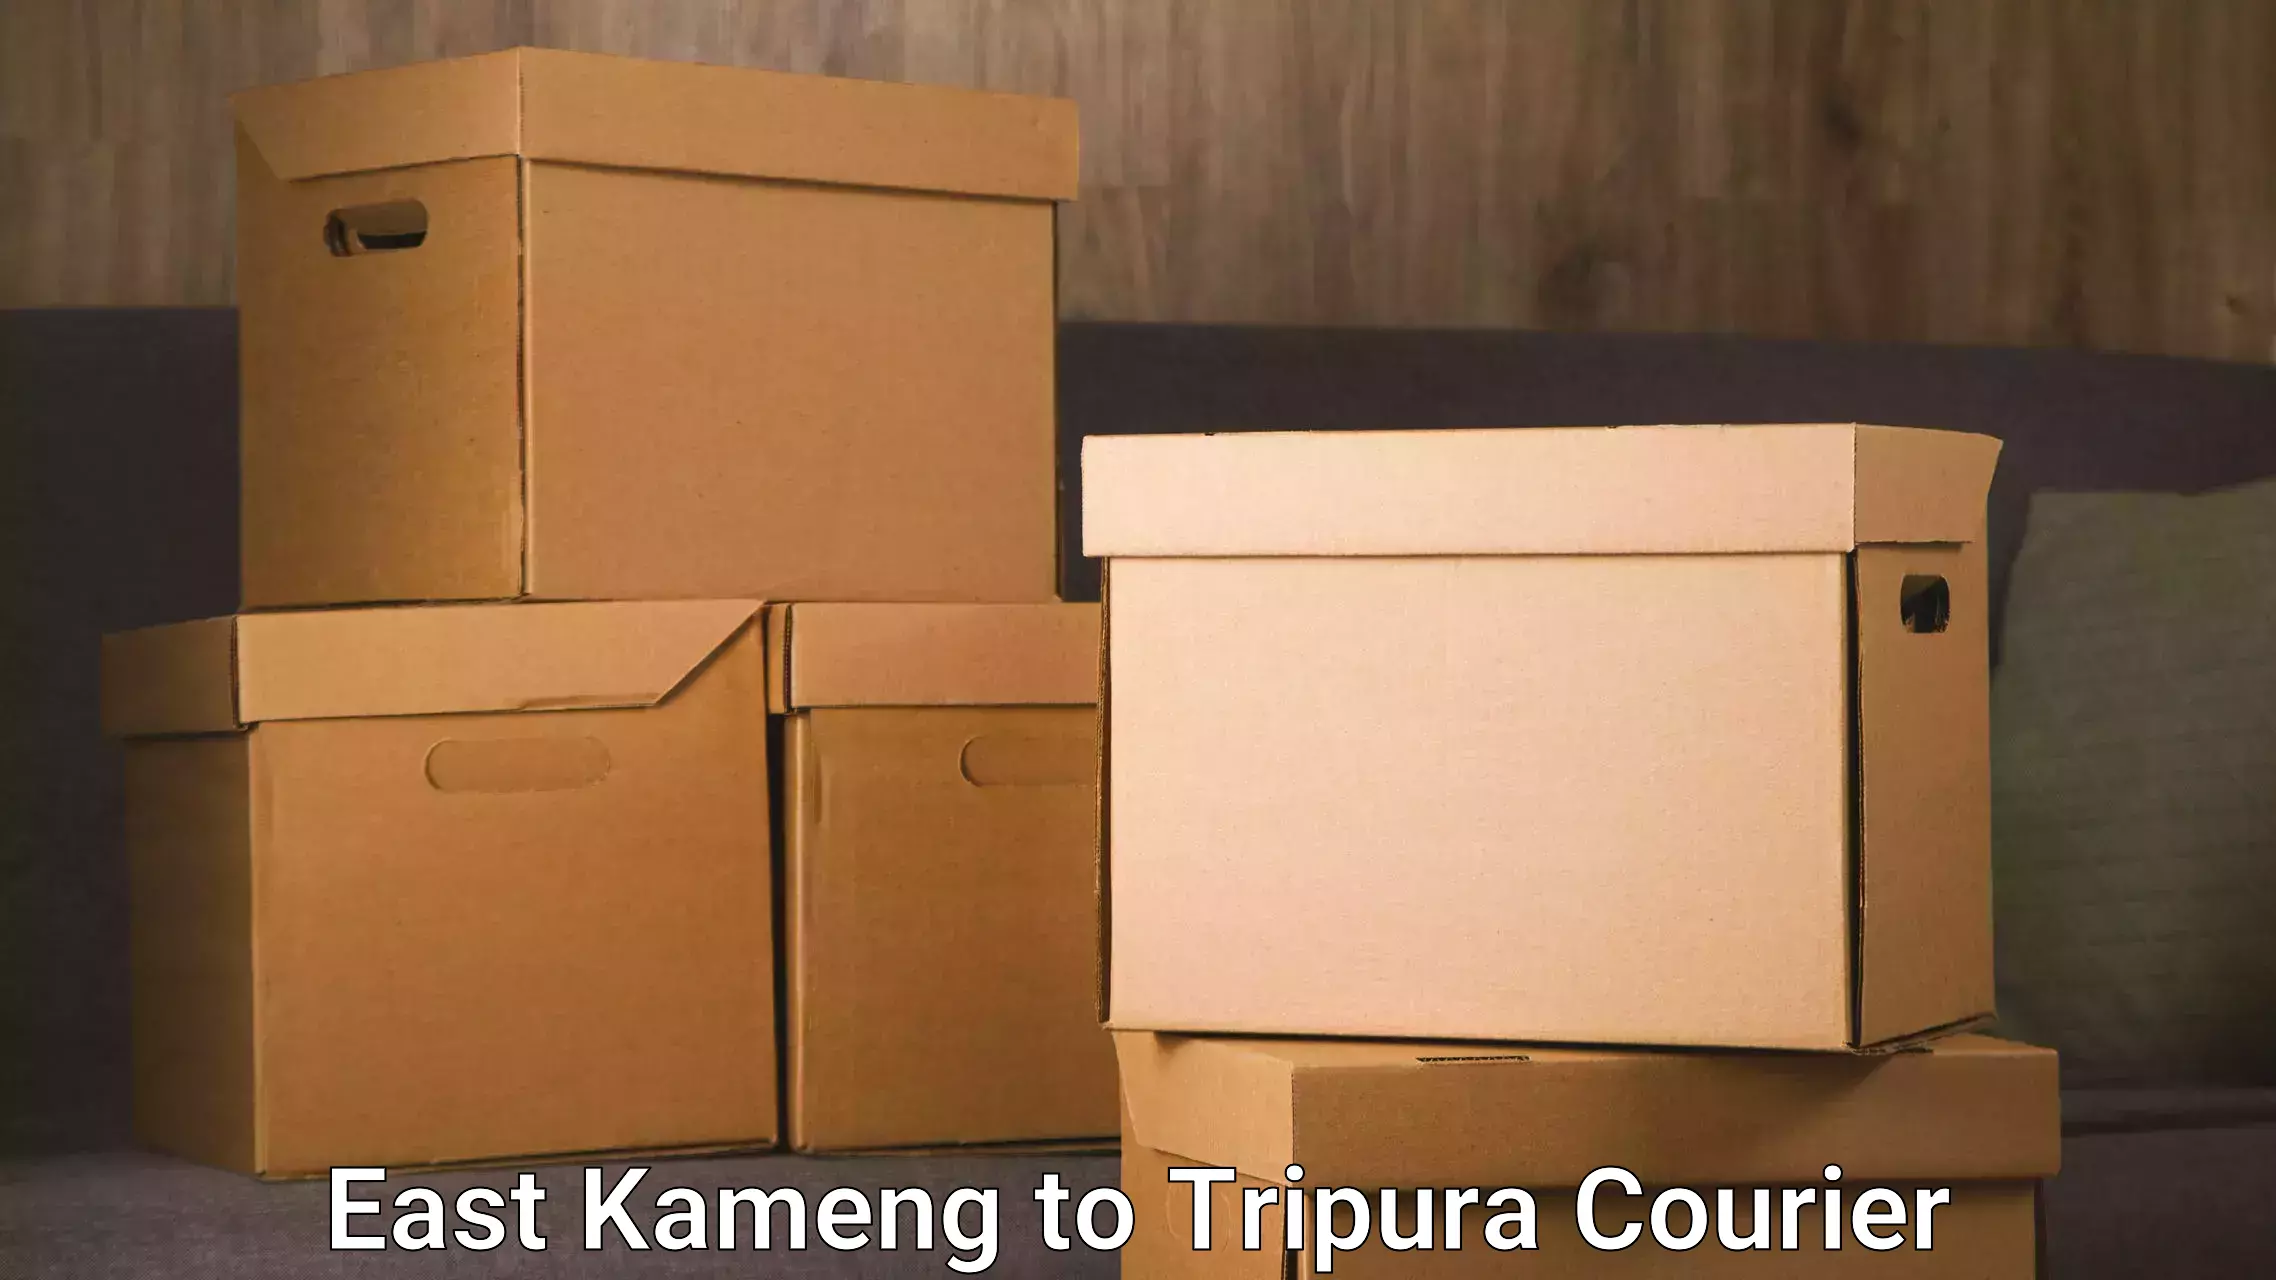 24-hour courier services East Kameng to Udaipur Tripura